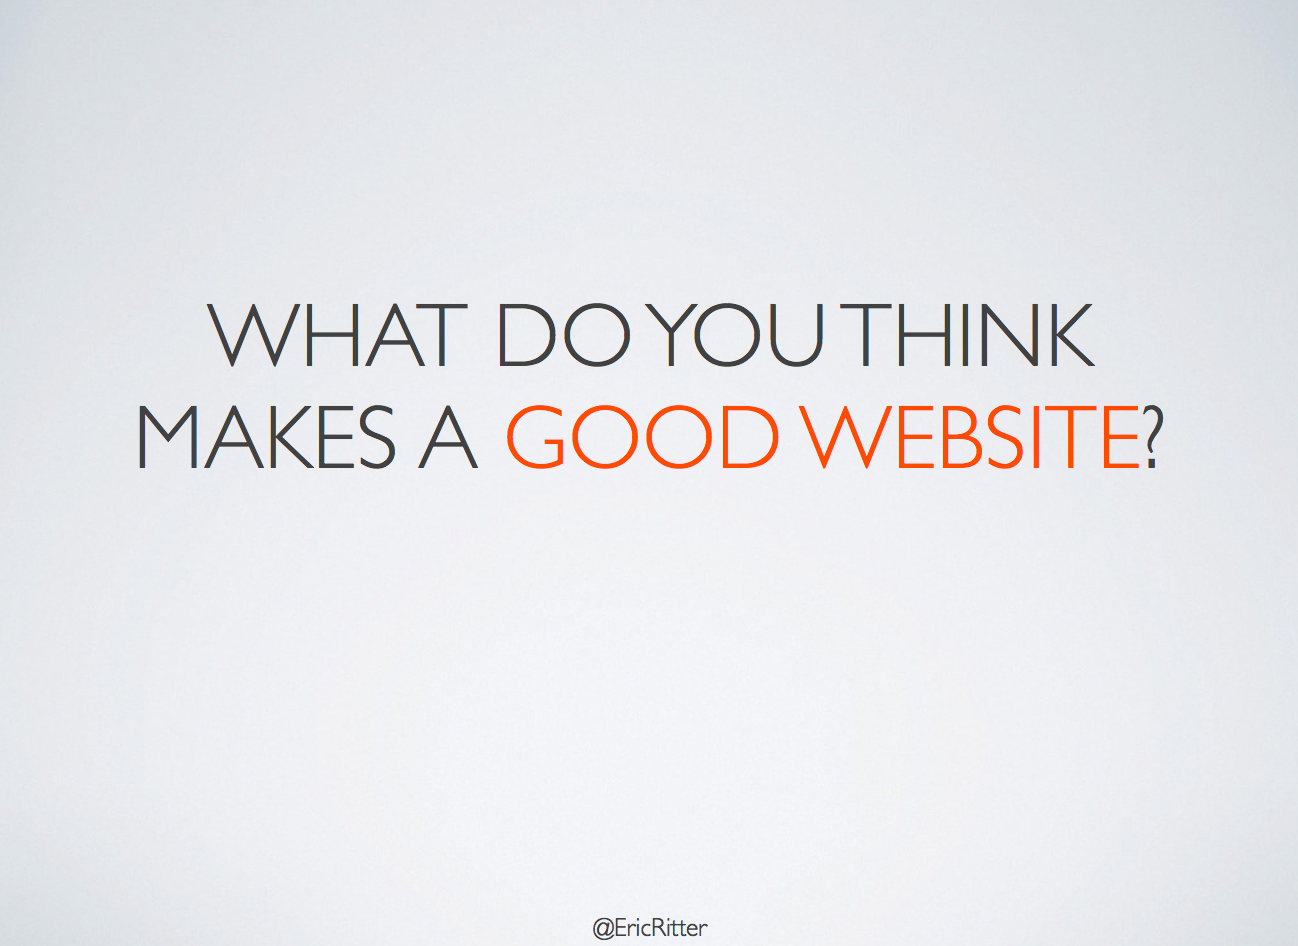 What makes a good website?